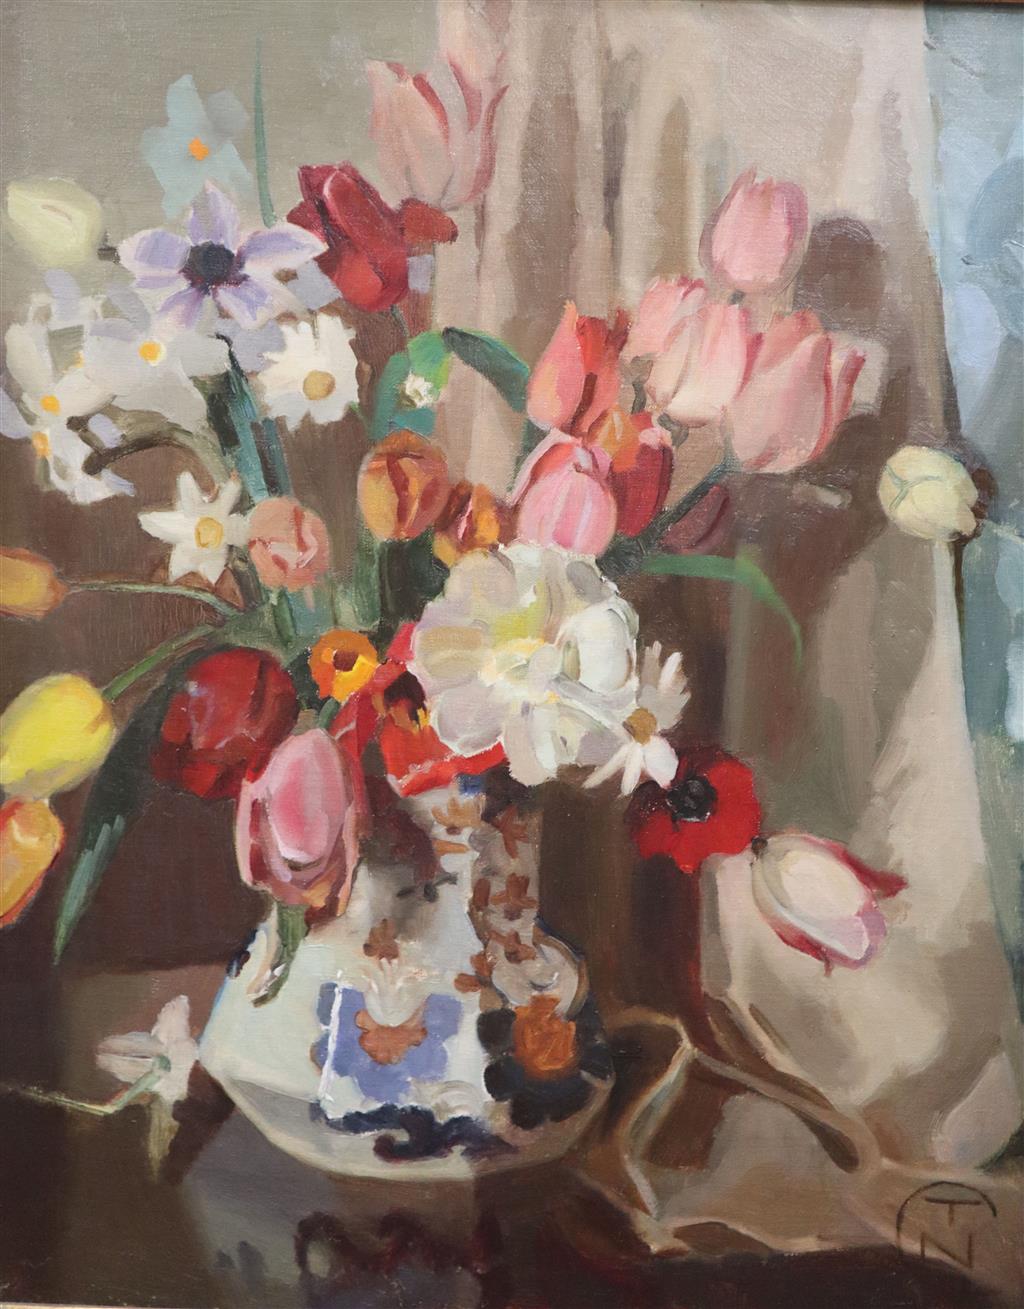 CTN, oil on canvas, Still life of spring flowers in a jug, monogrammed, 55 x 45cm